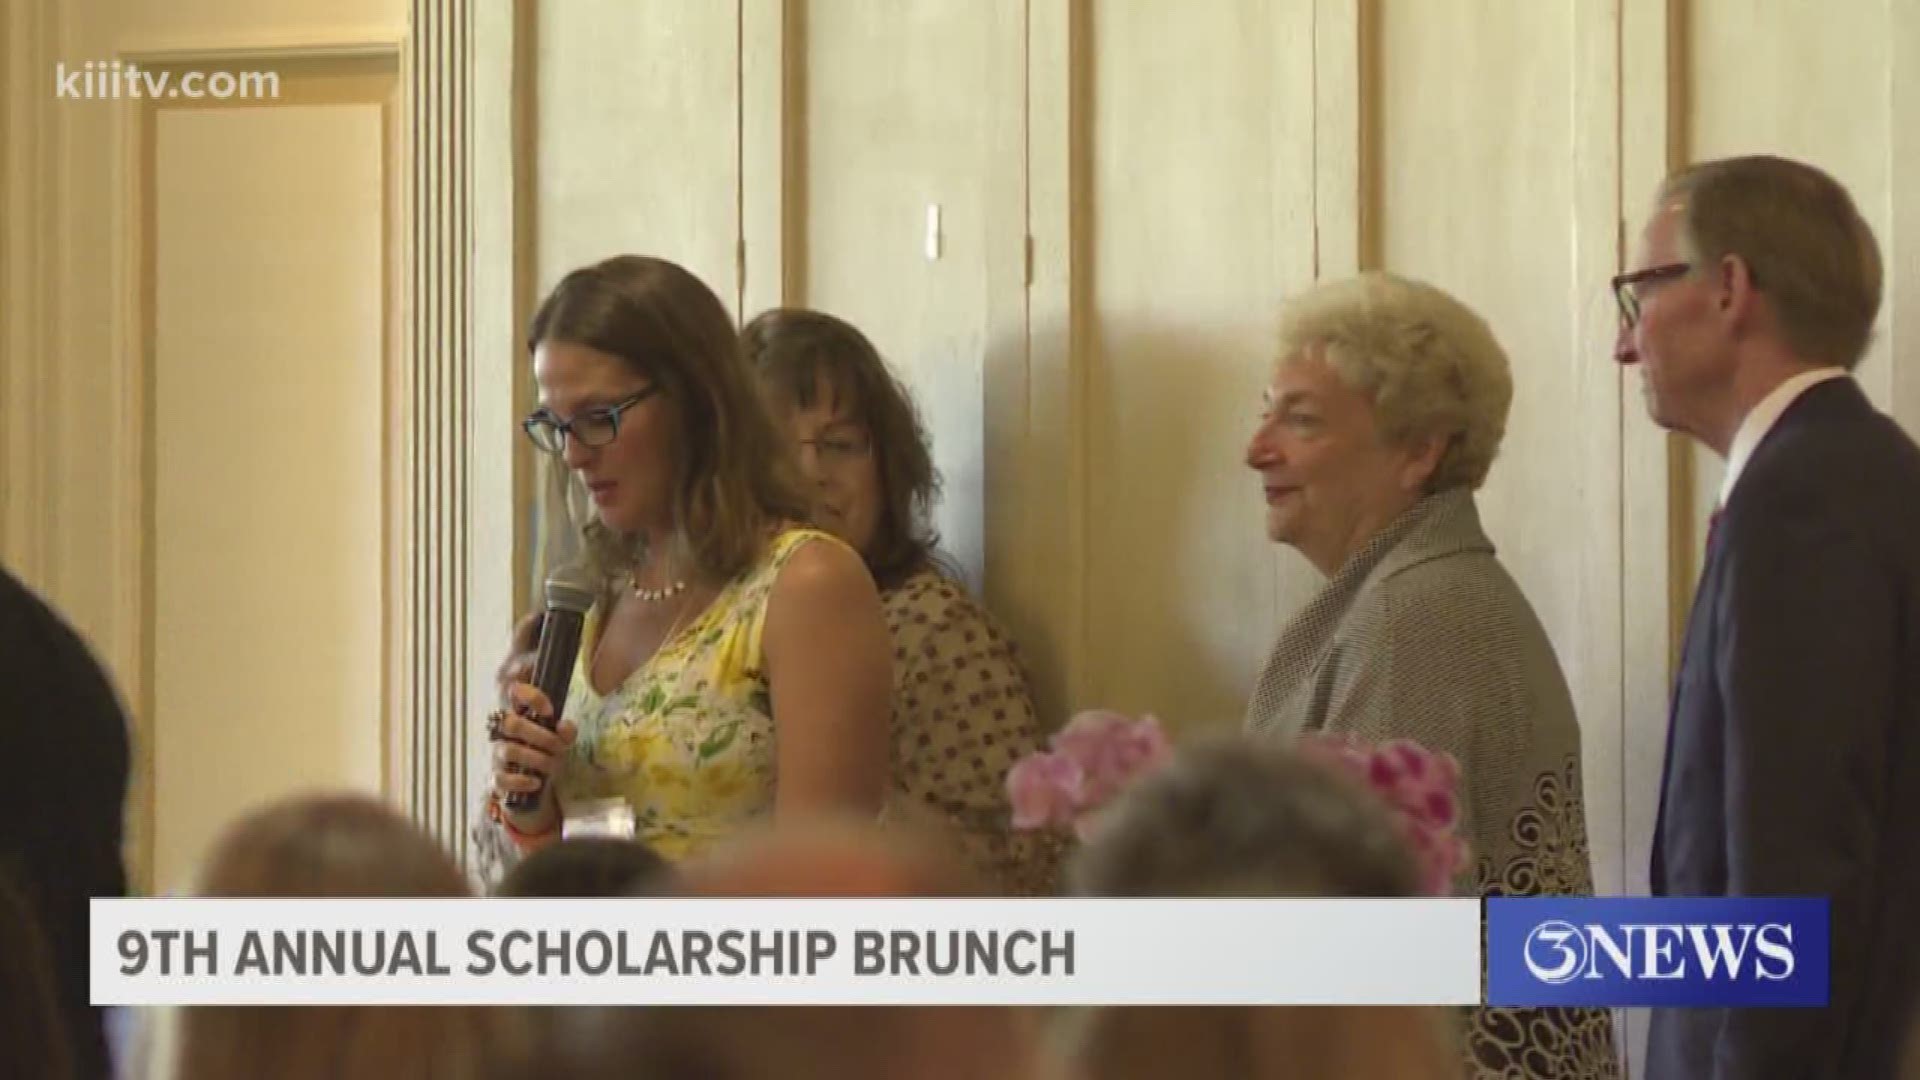 Students were awarded scholarships to help reach their goals.